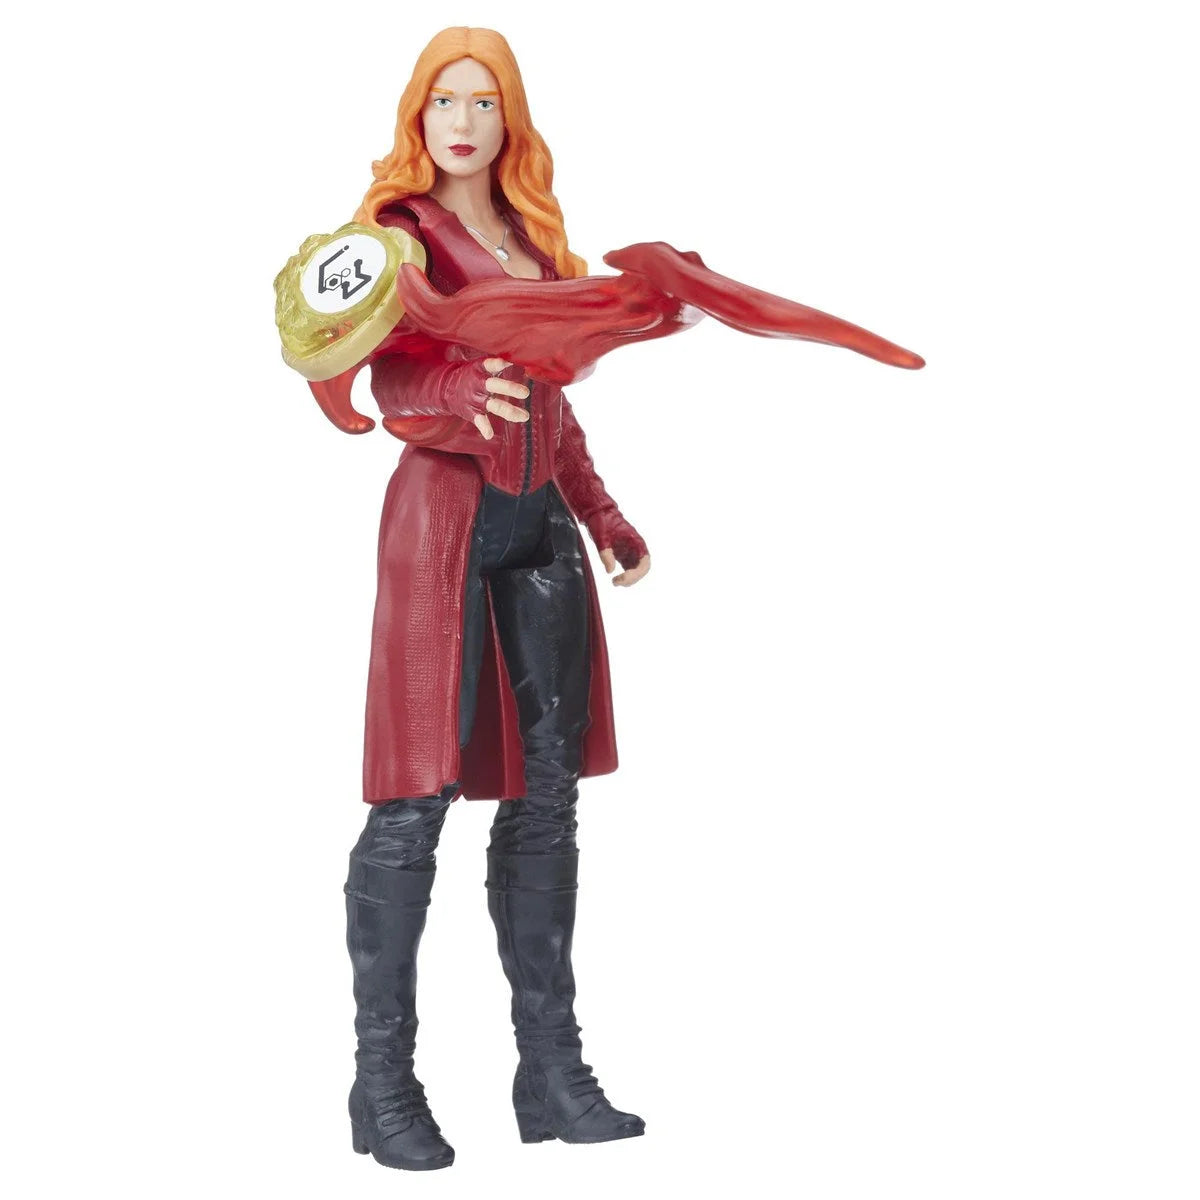 Avengers: Infinity War Scarlet Witch E0605-E1419 | Toysall